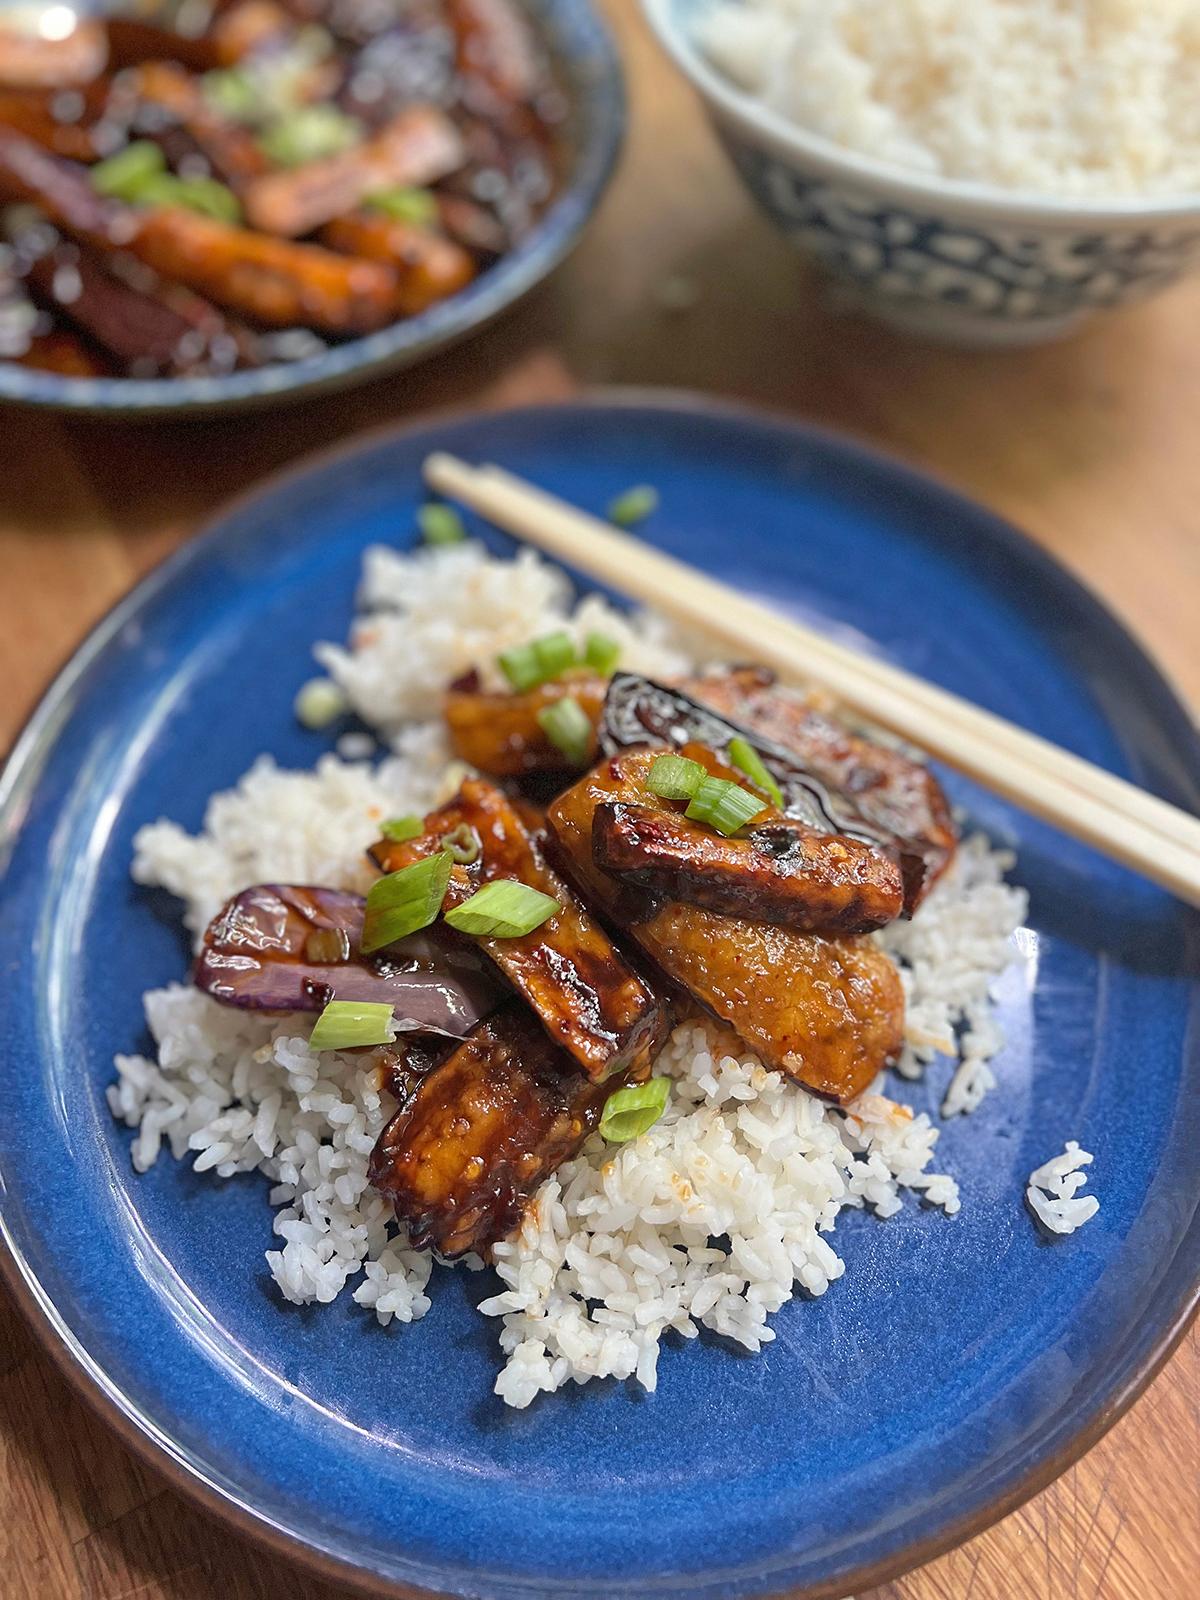 "Fish-fragrant" eggplant gets a spicy kick from a sauce made with Sichuan chili bean sauce and Chinese black vinegar. (Gretchen McKay/Pittsburgh Post-Gazette/TNS)